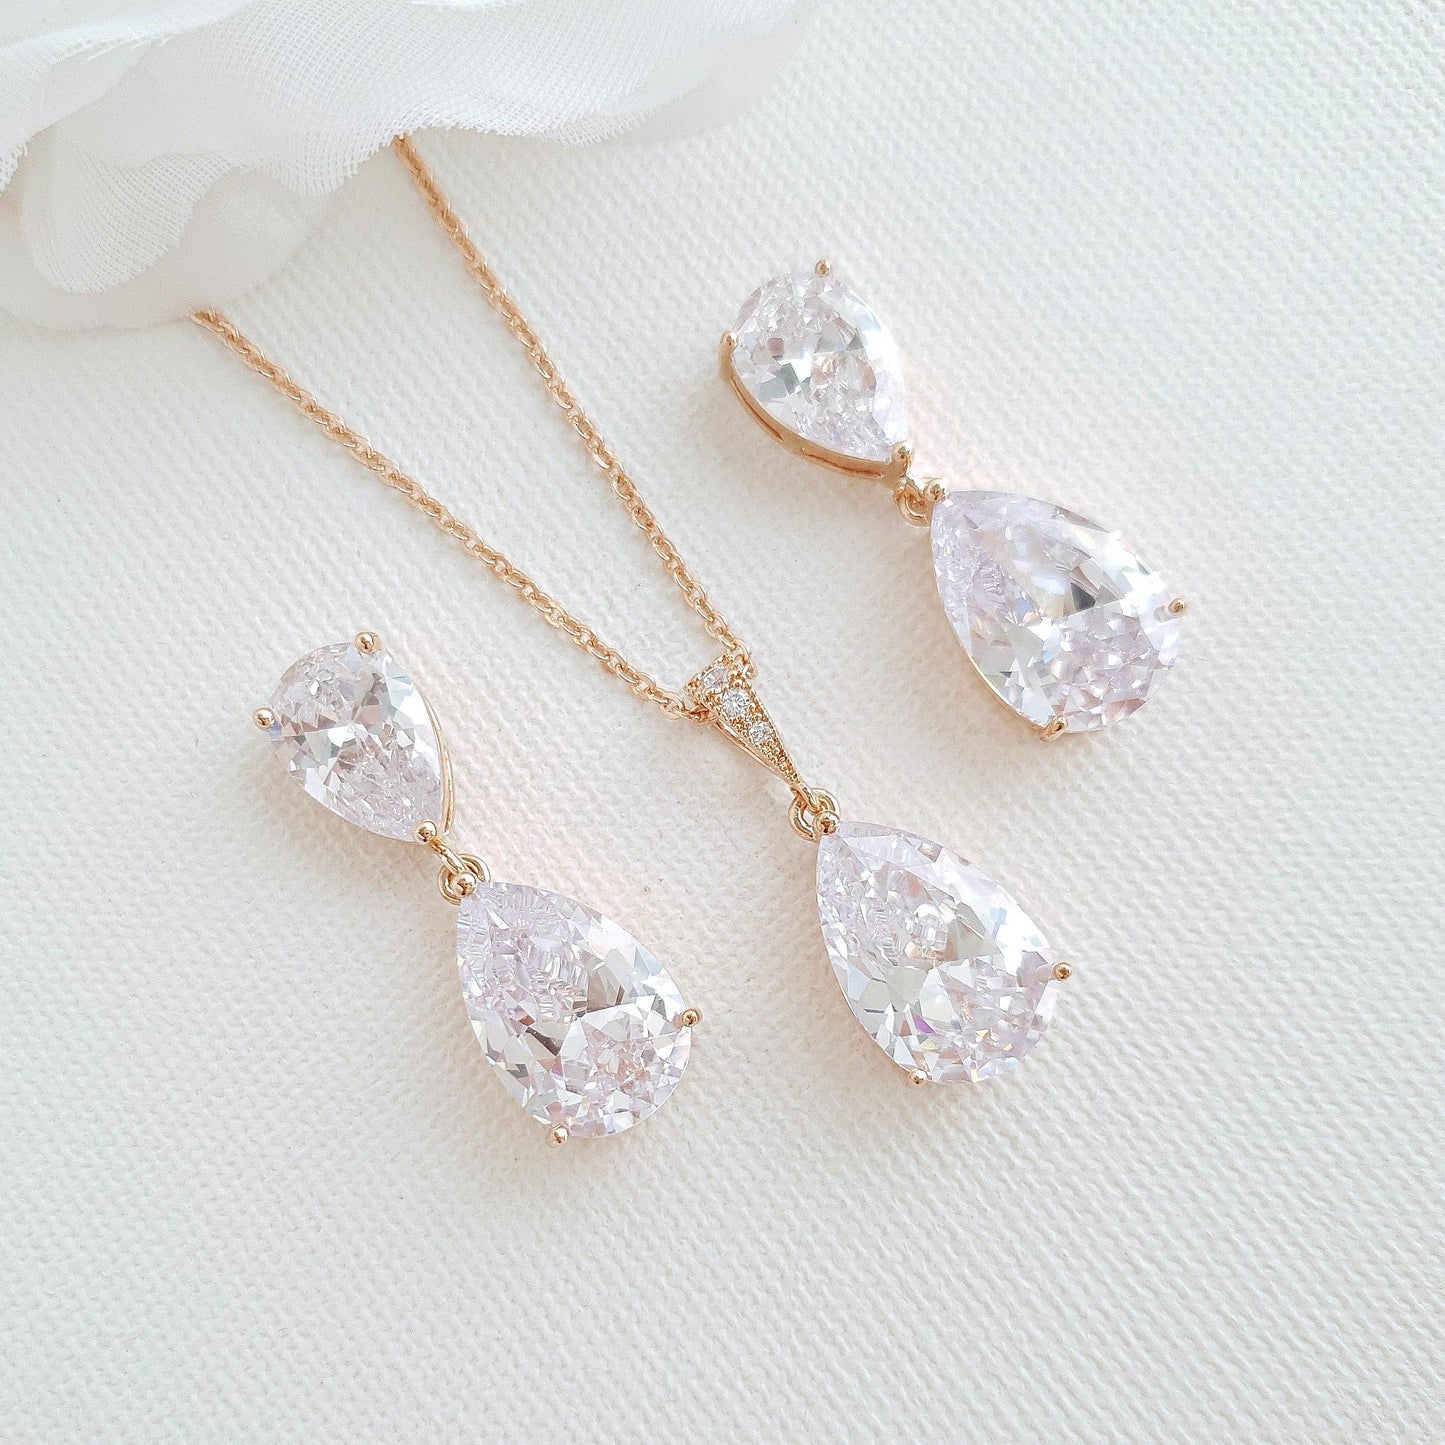 Clear Cubic Zirconia Earrings and Necklace Set in Rose Gold-Clara